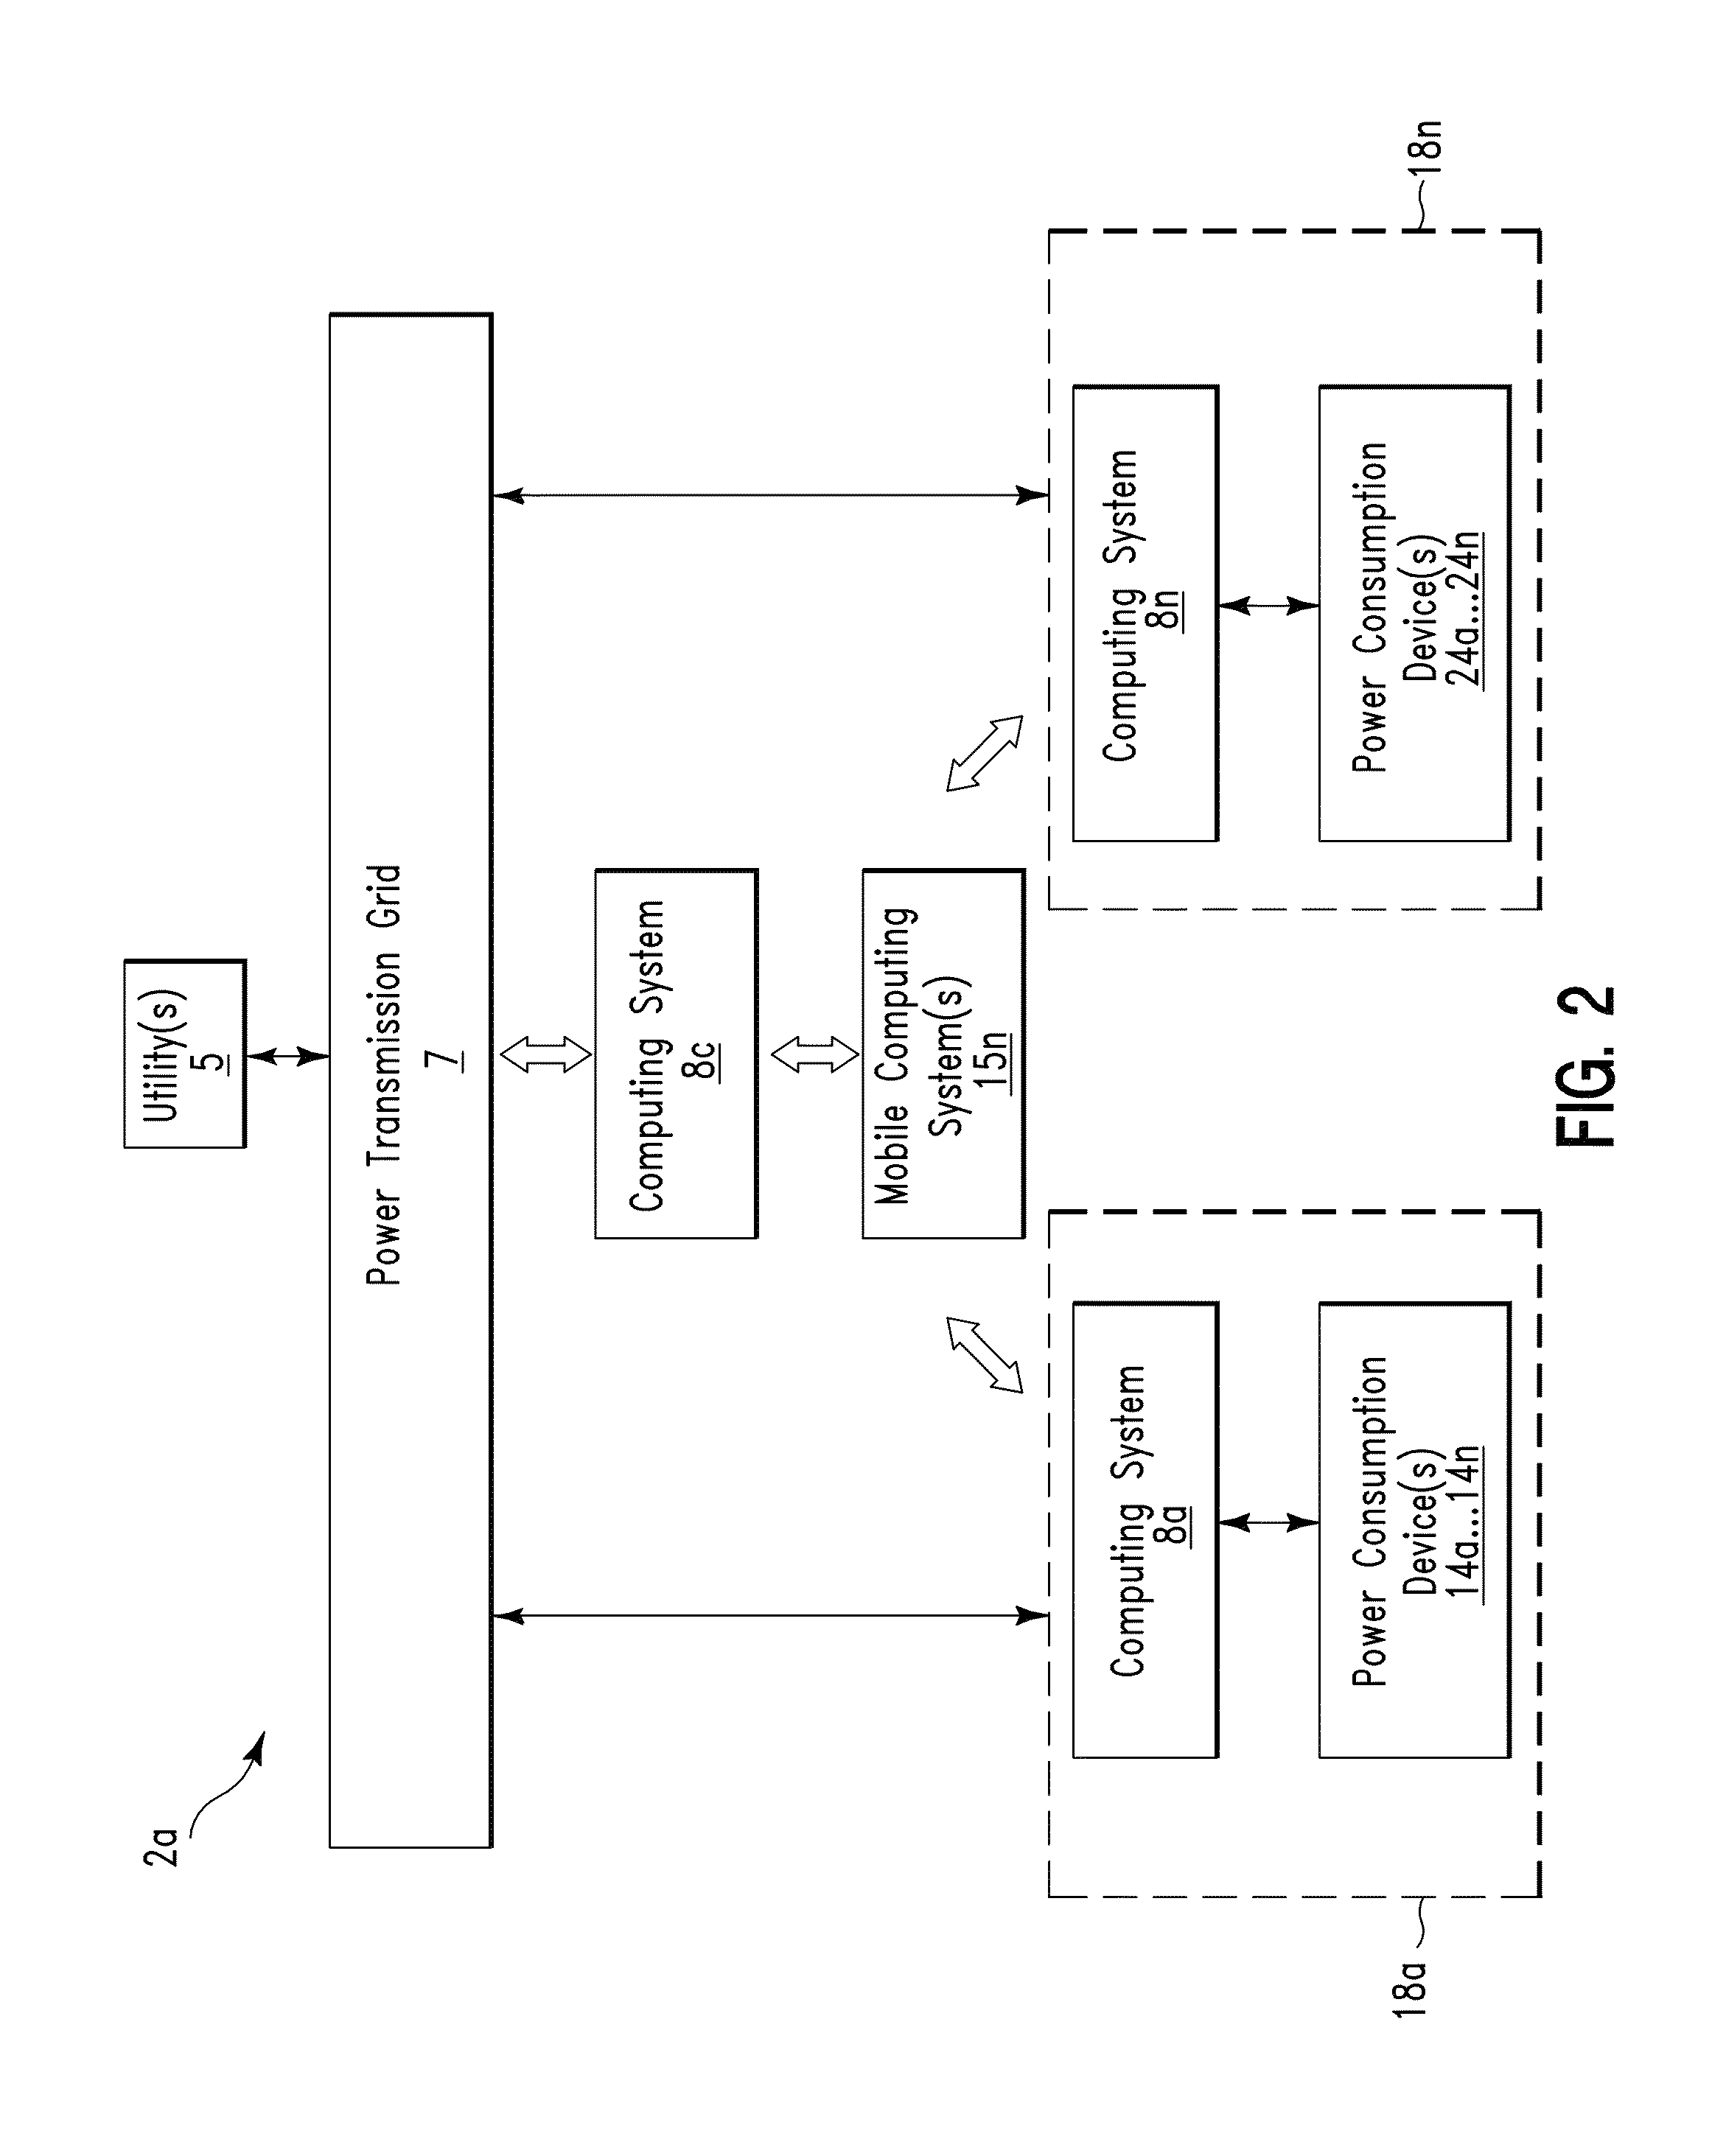 Power profile management method and system